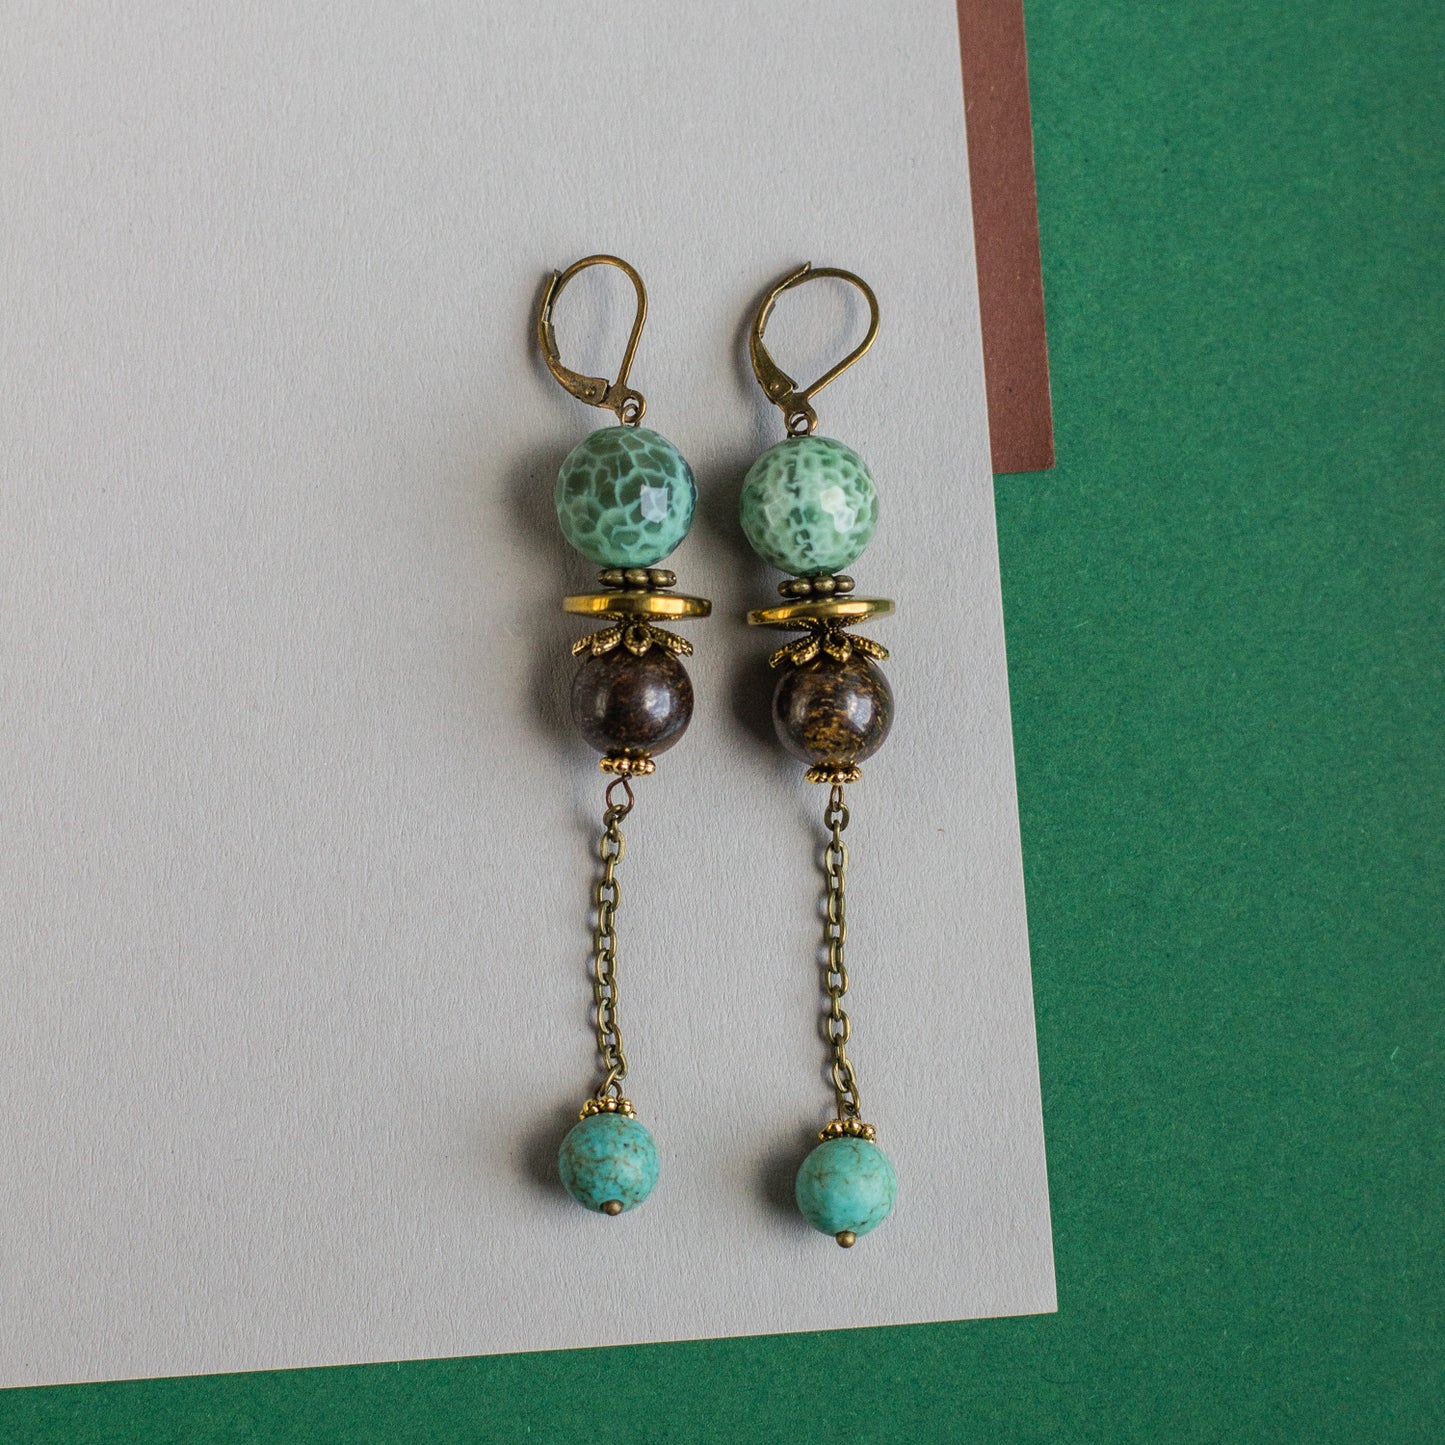 These simple yet beautiful green and brown dangle earrings are a perfect accent for any occasion, and a great gift idea.